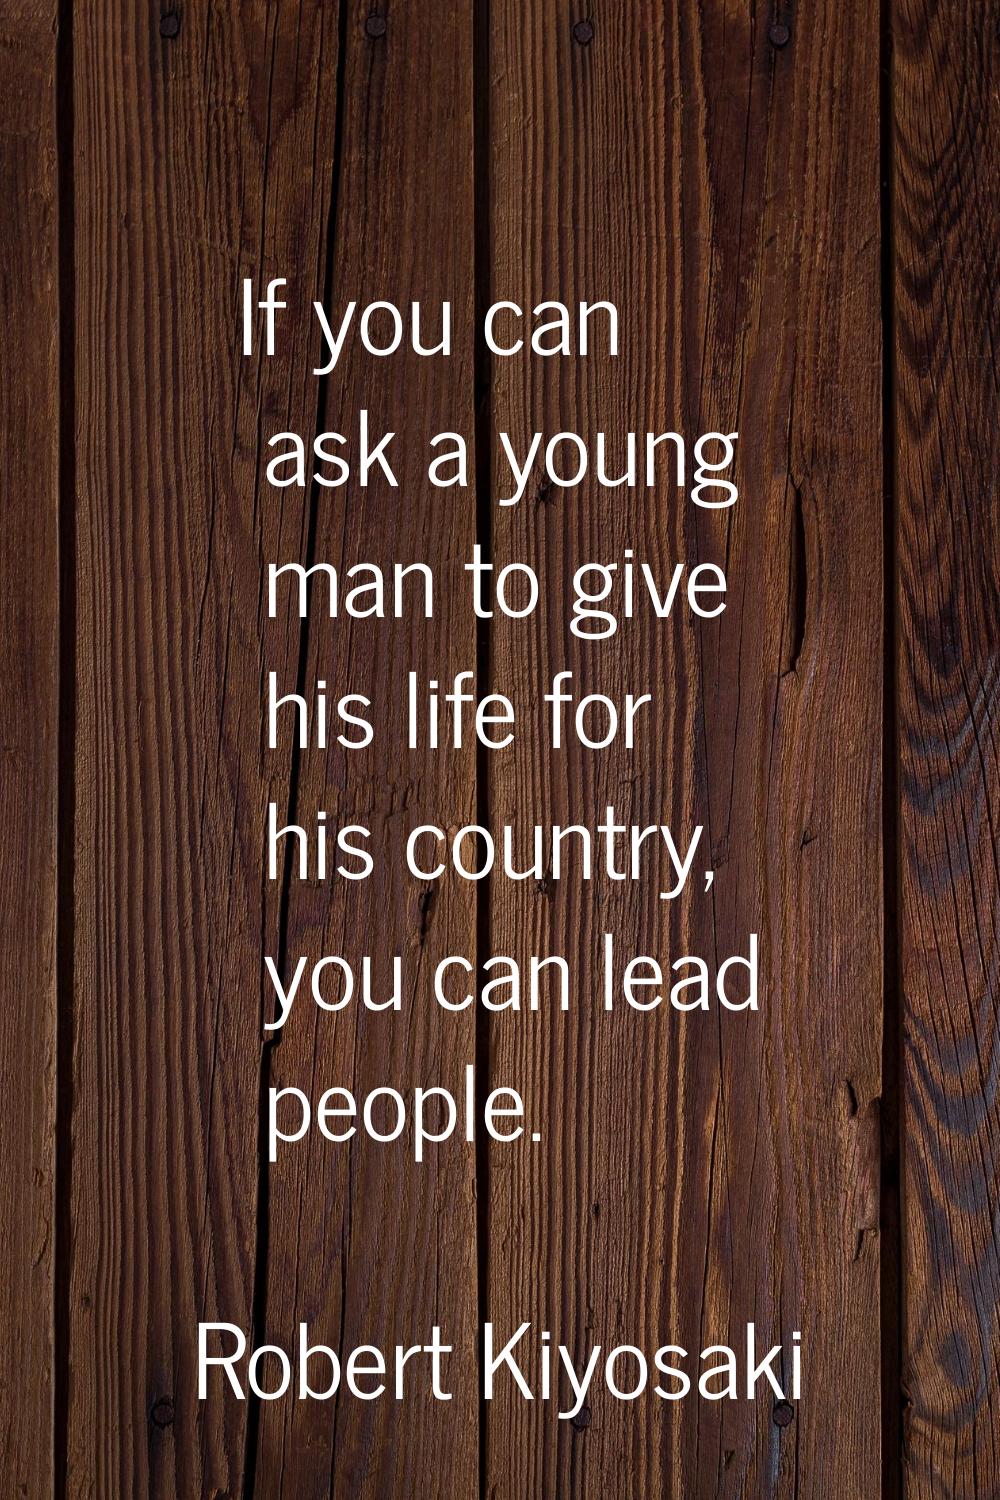 If you can ask a young man to give his life for his country, you can lead people.